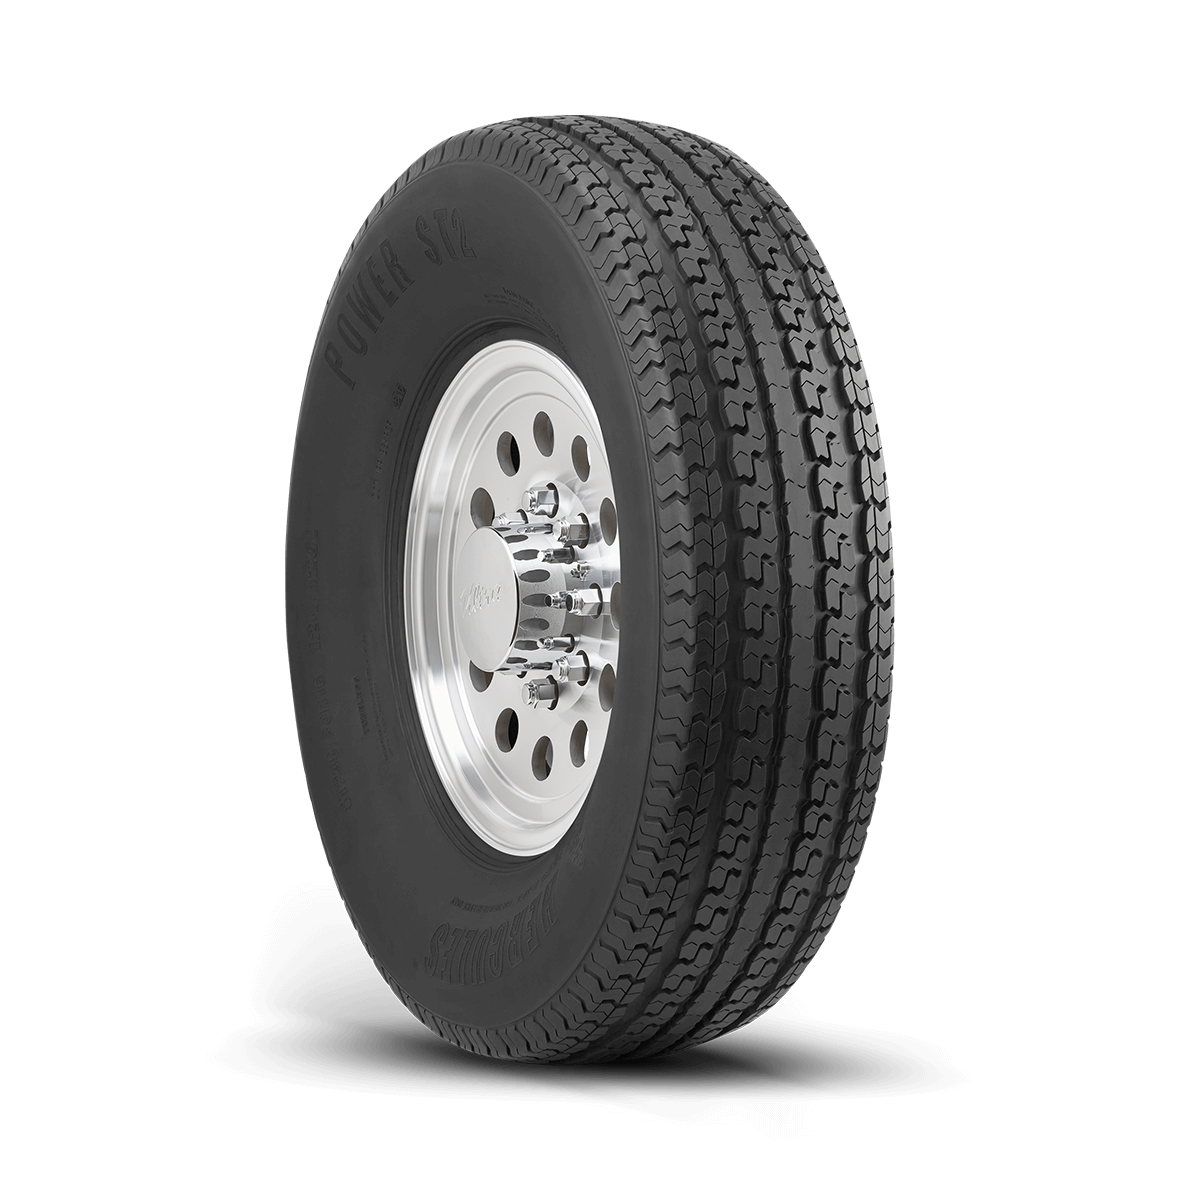 Right side read and rim view of the Power Specialty Trailer 2 tire on a white background